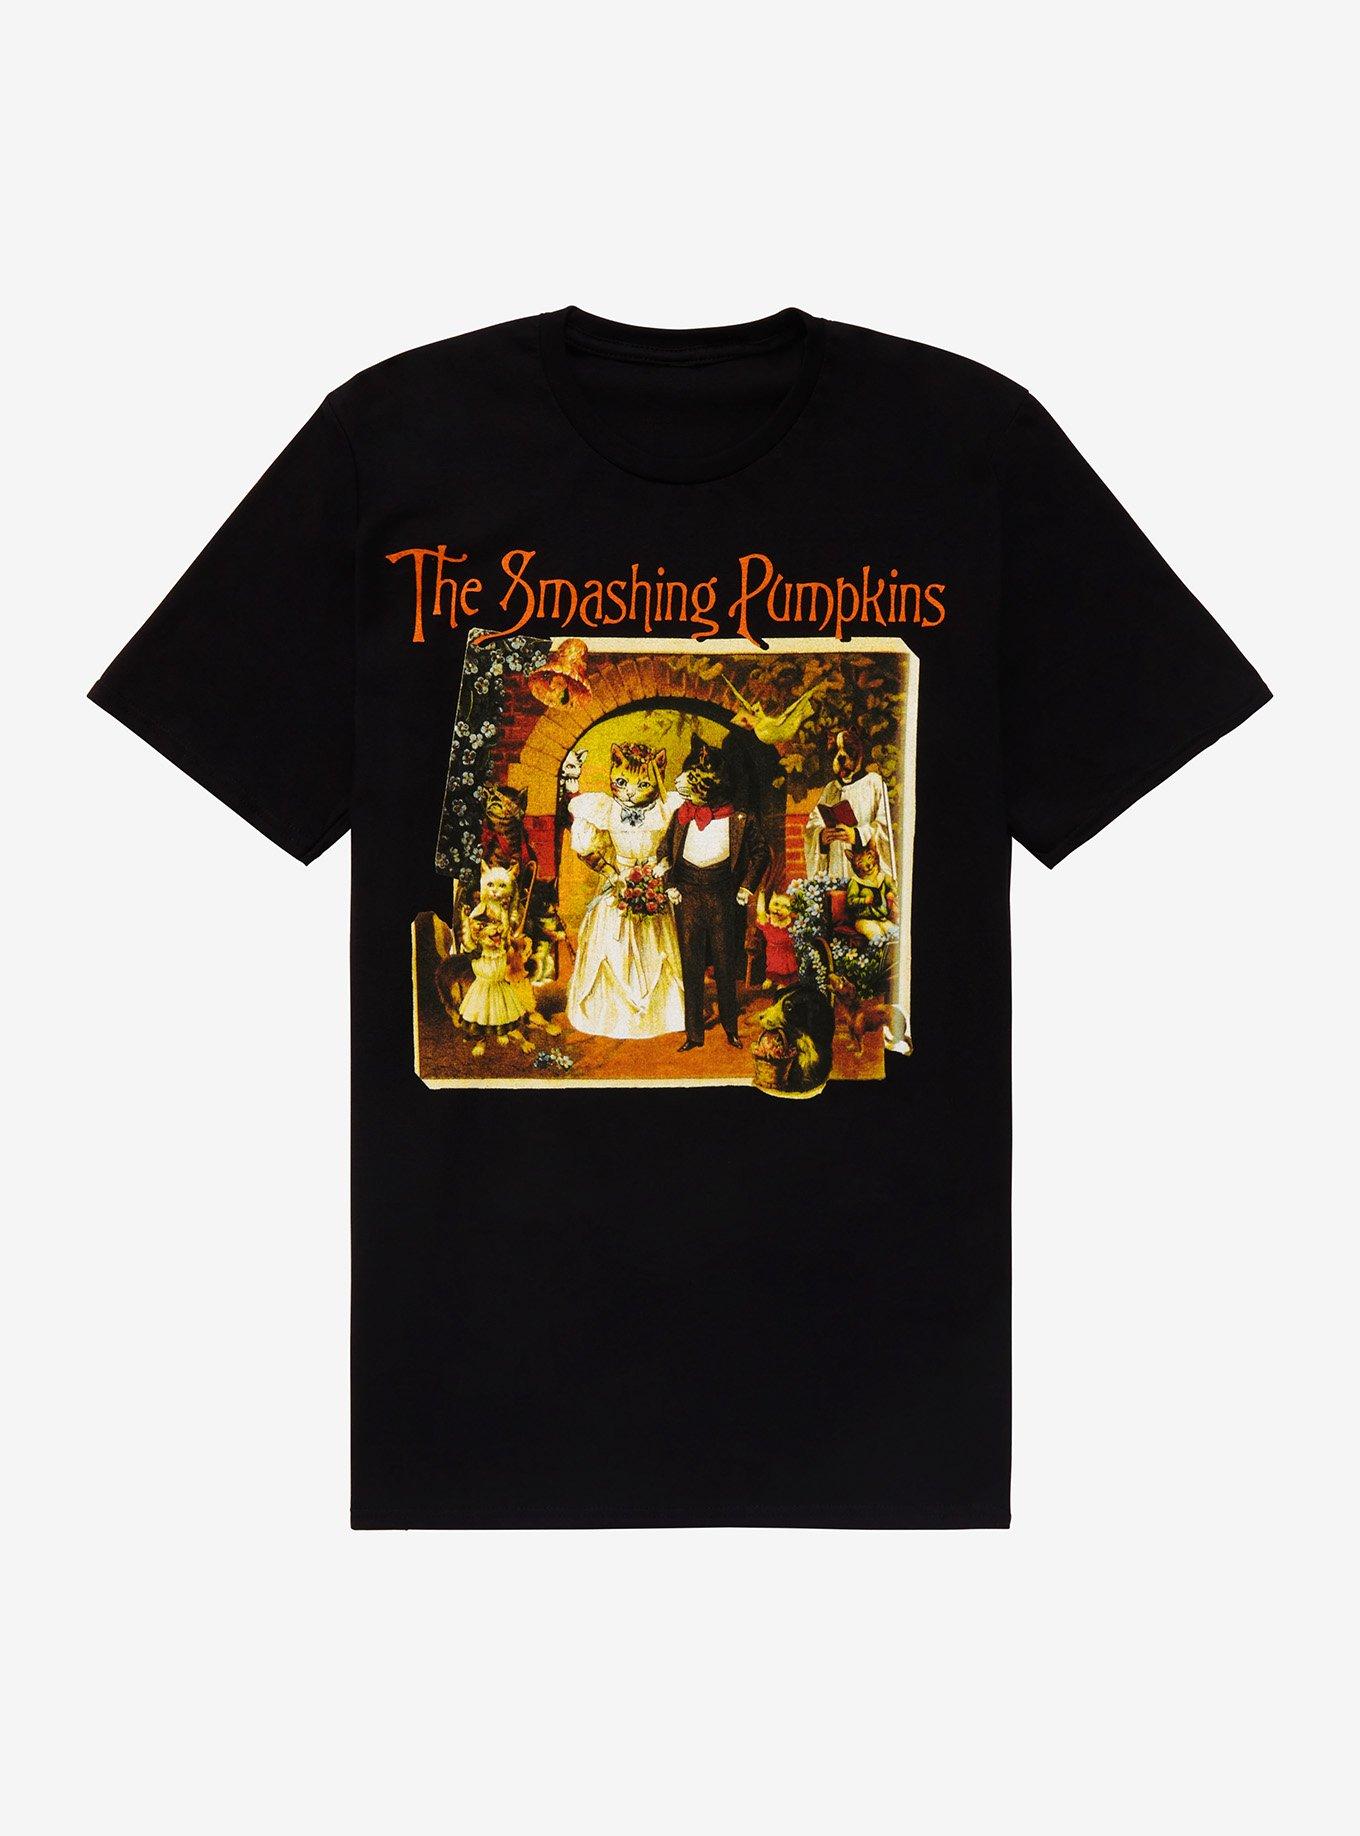 The Smashing Pumpkins Intoxicated With The Madness T-Shirt | Hot Topic